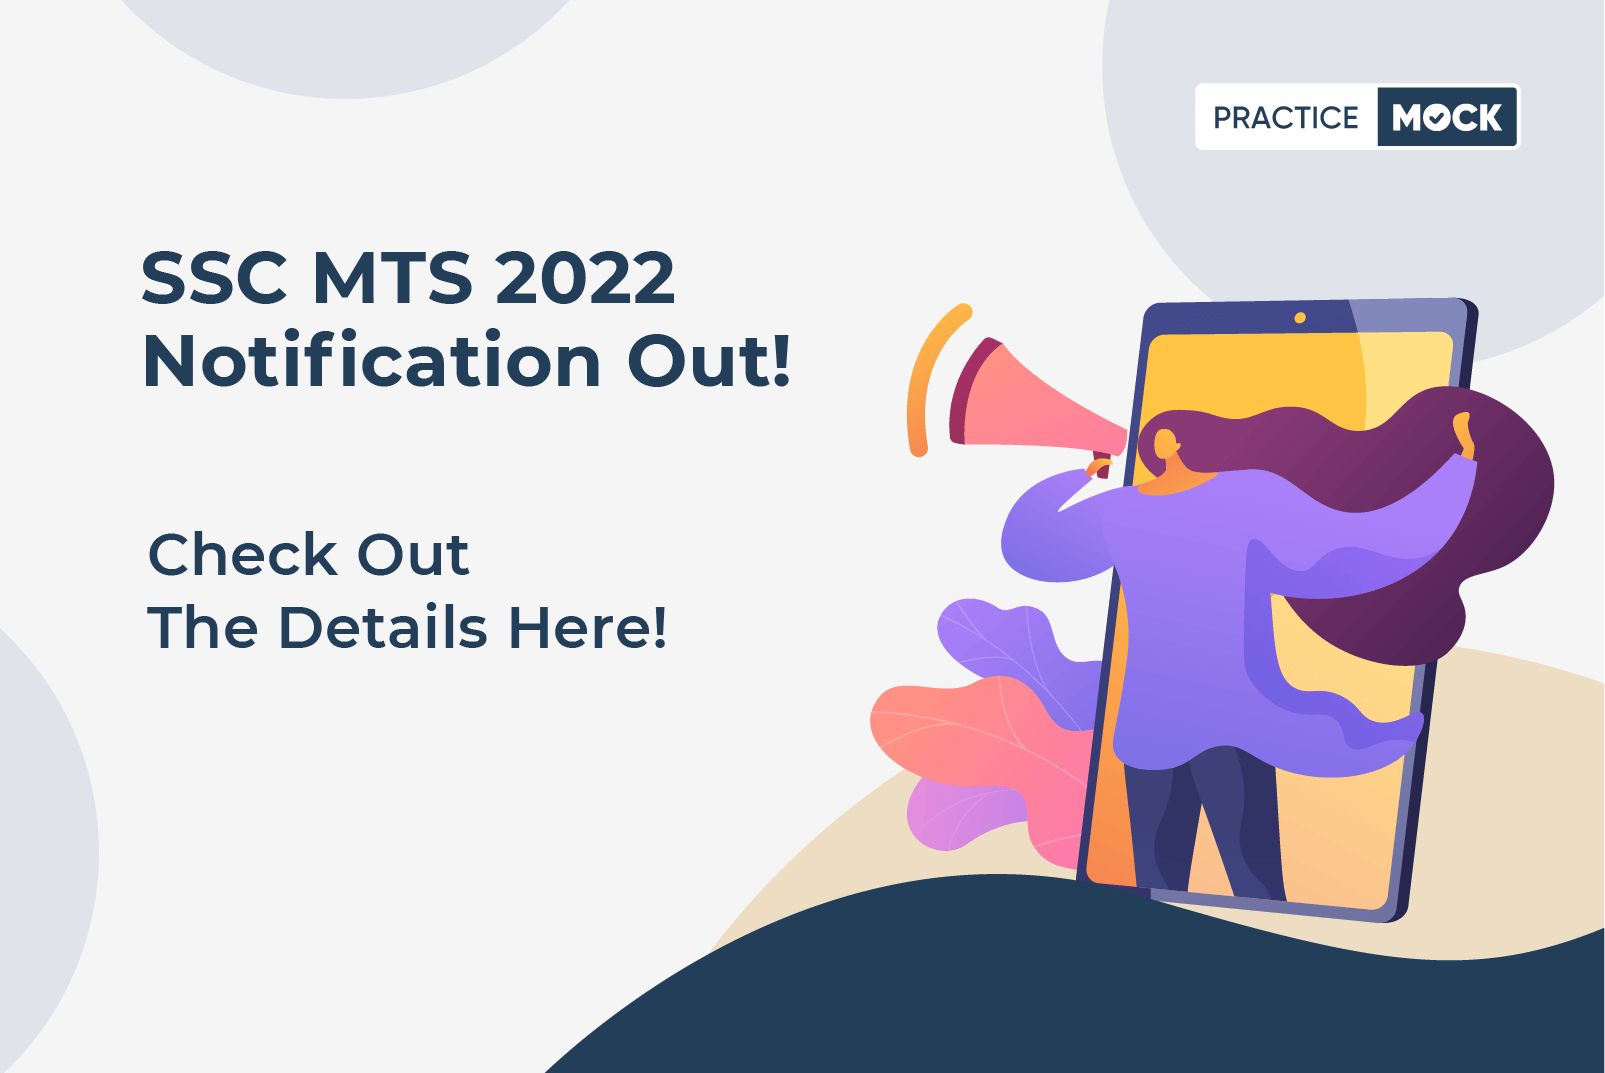 SSC MTS 2022 Notification out! -SSC has released bumper vacancies, know details here!